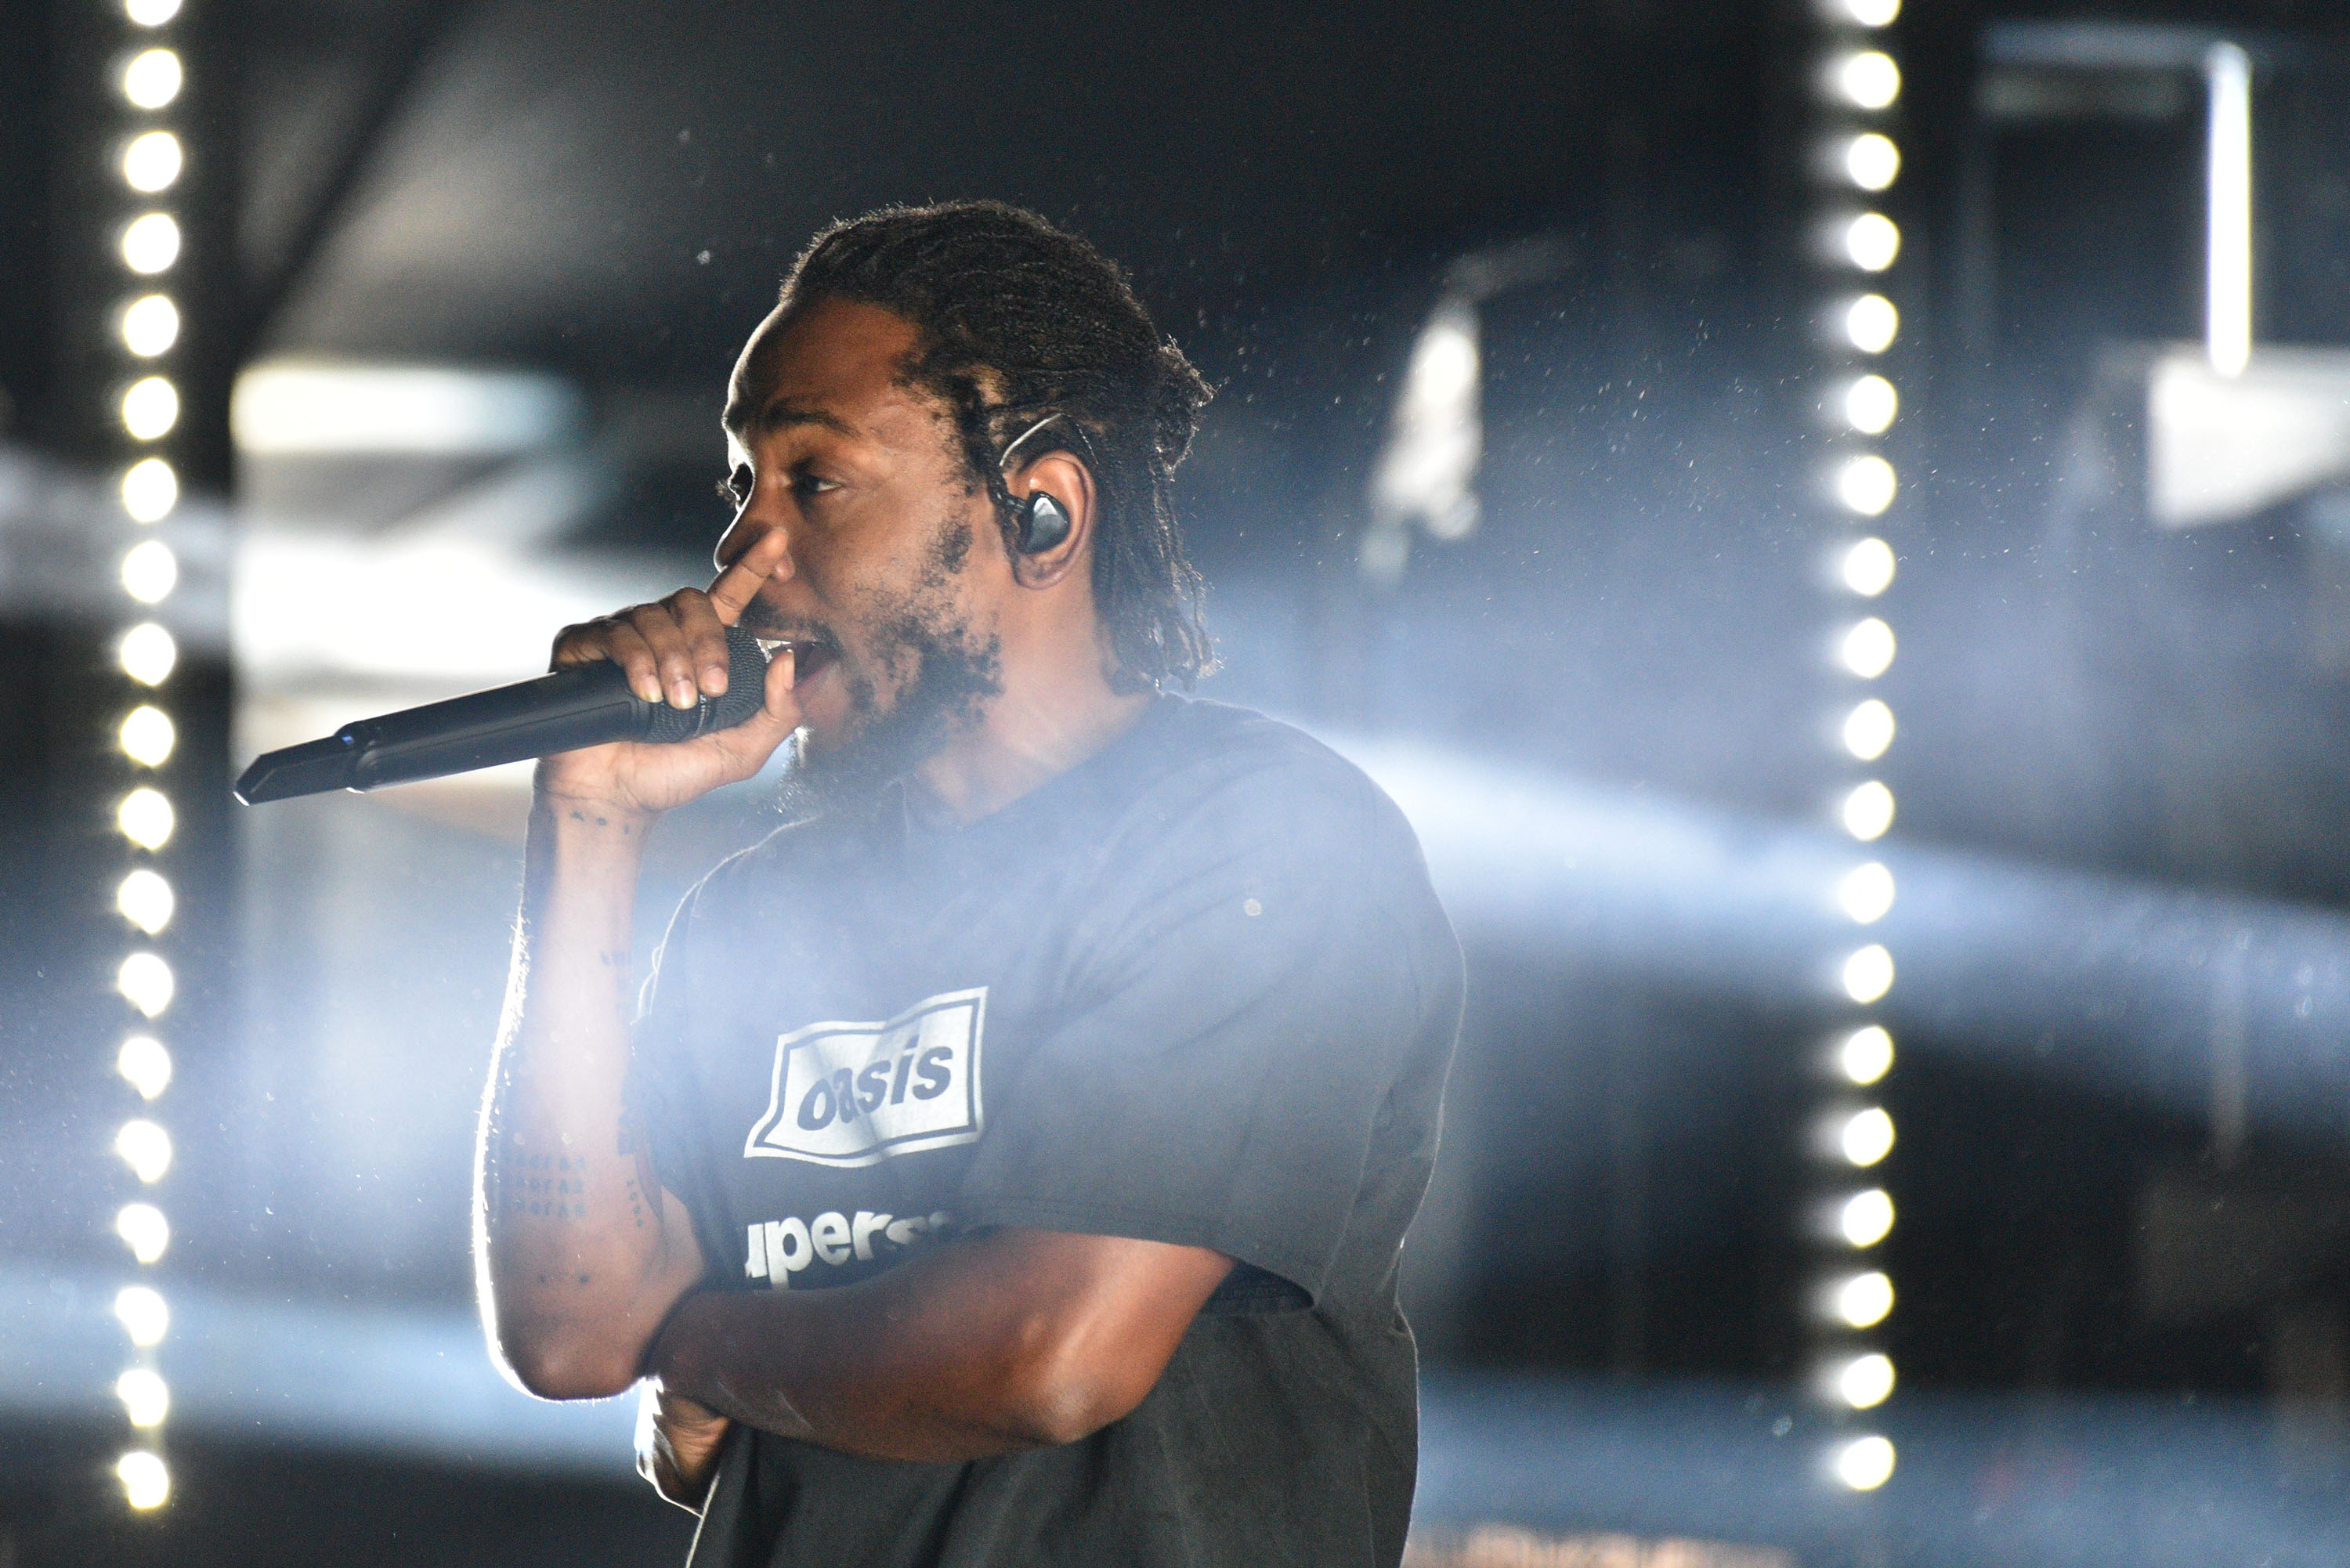 Kendrick Lamar's 'The Big Steppers Tour' Streaming On